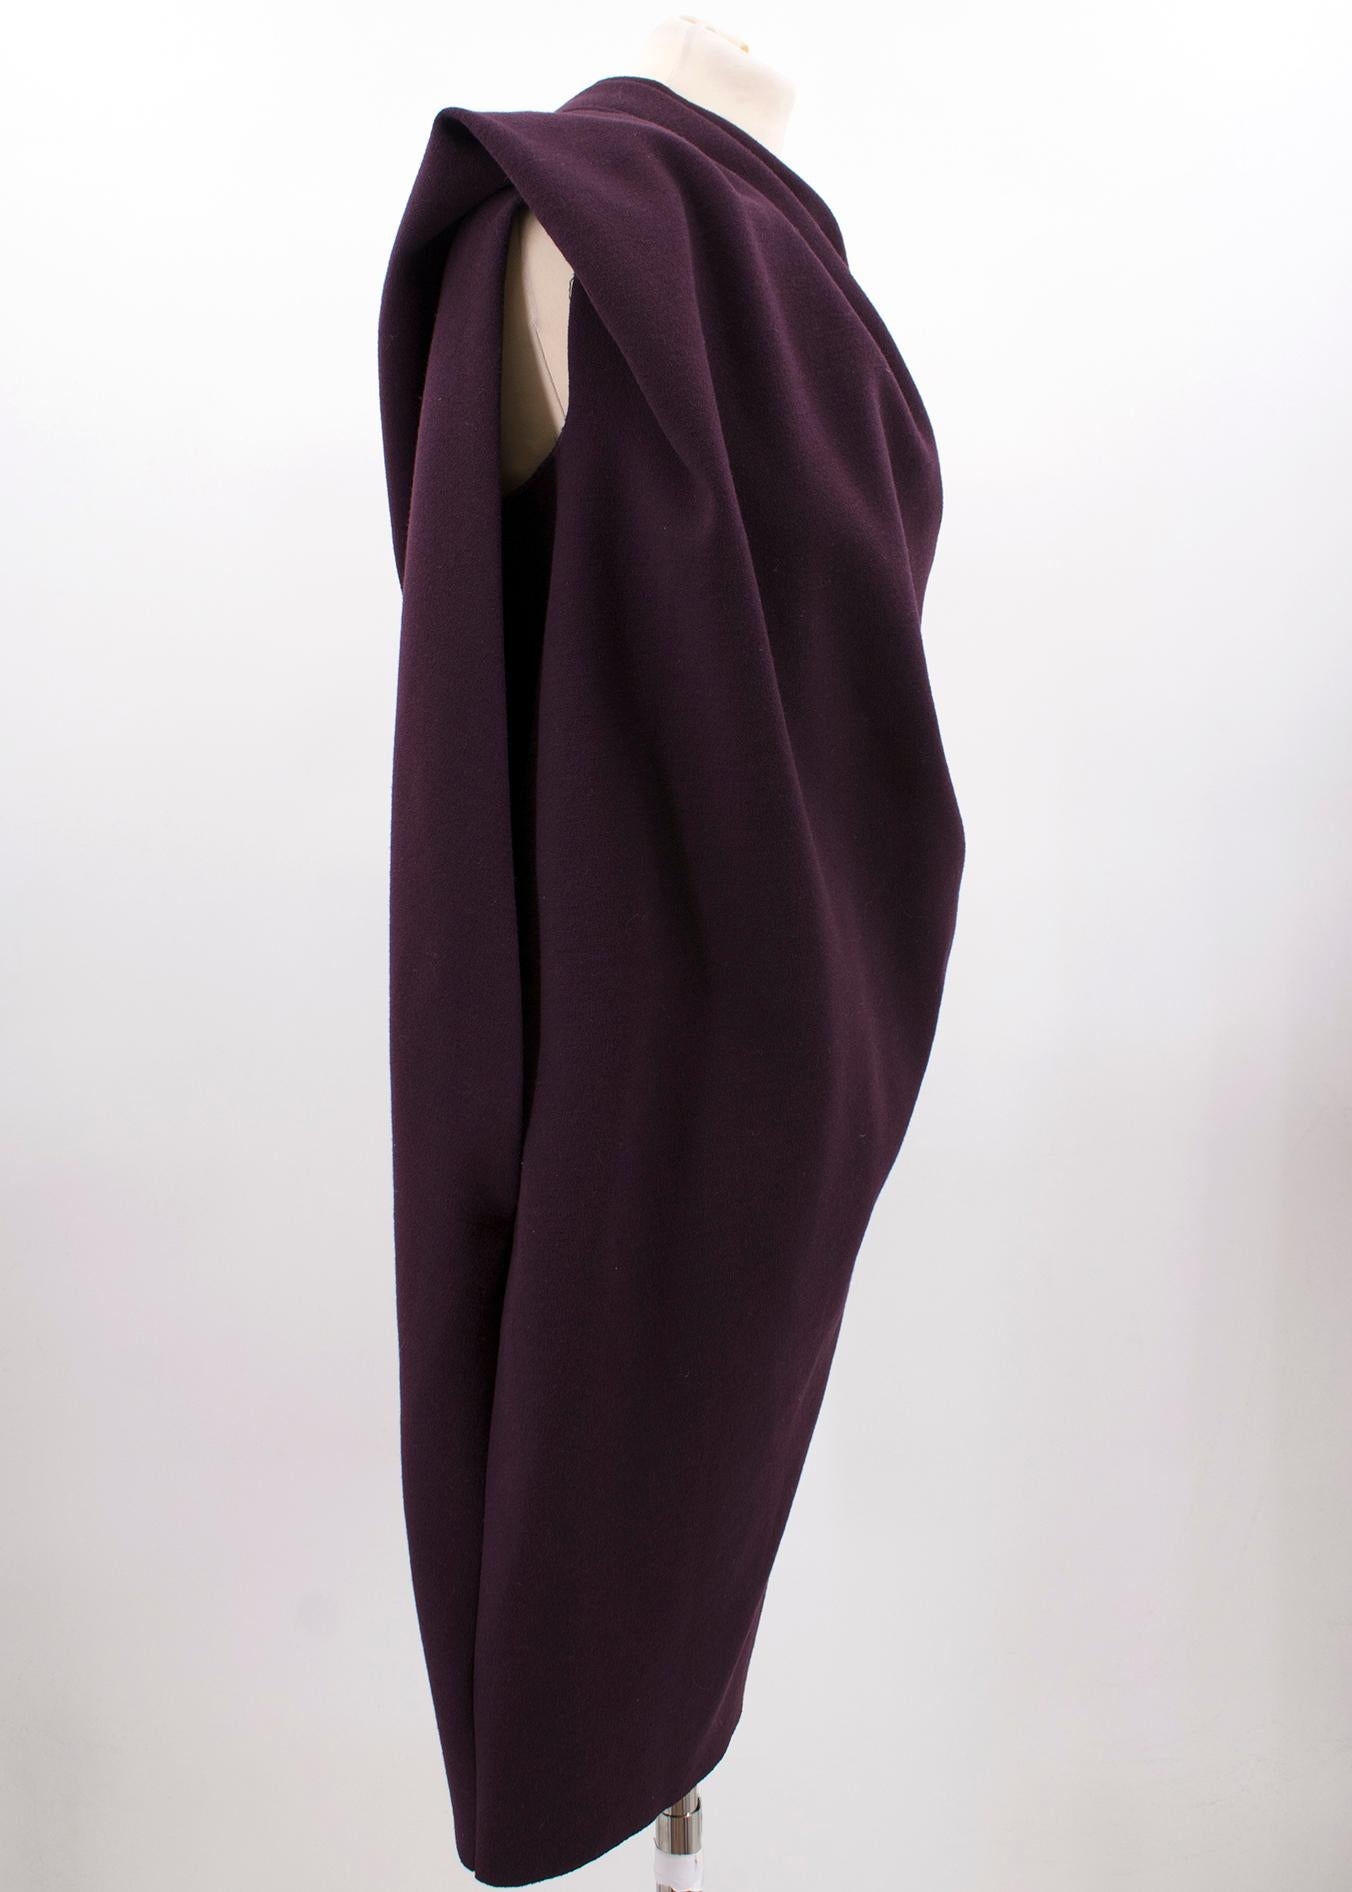 Lanvin Purple Wool One Shoulder Dress One size  In Good Condition For Sale In London, GB